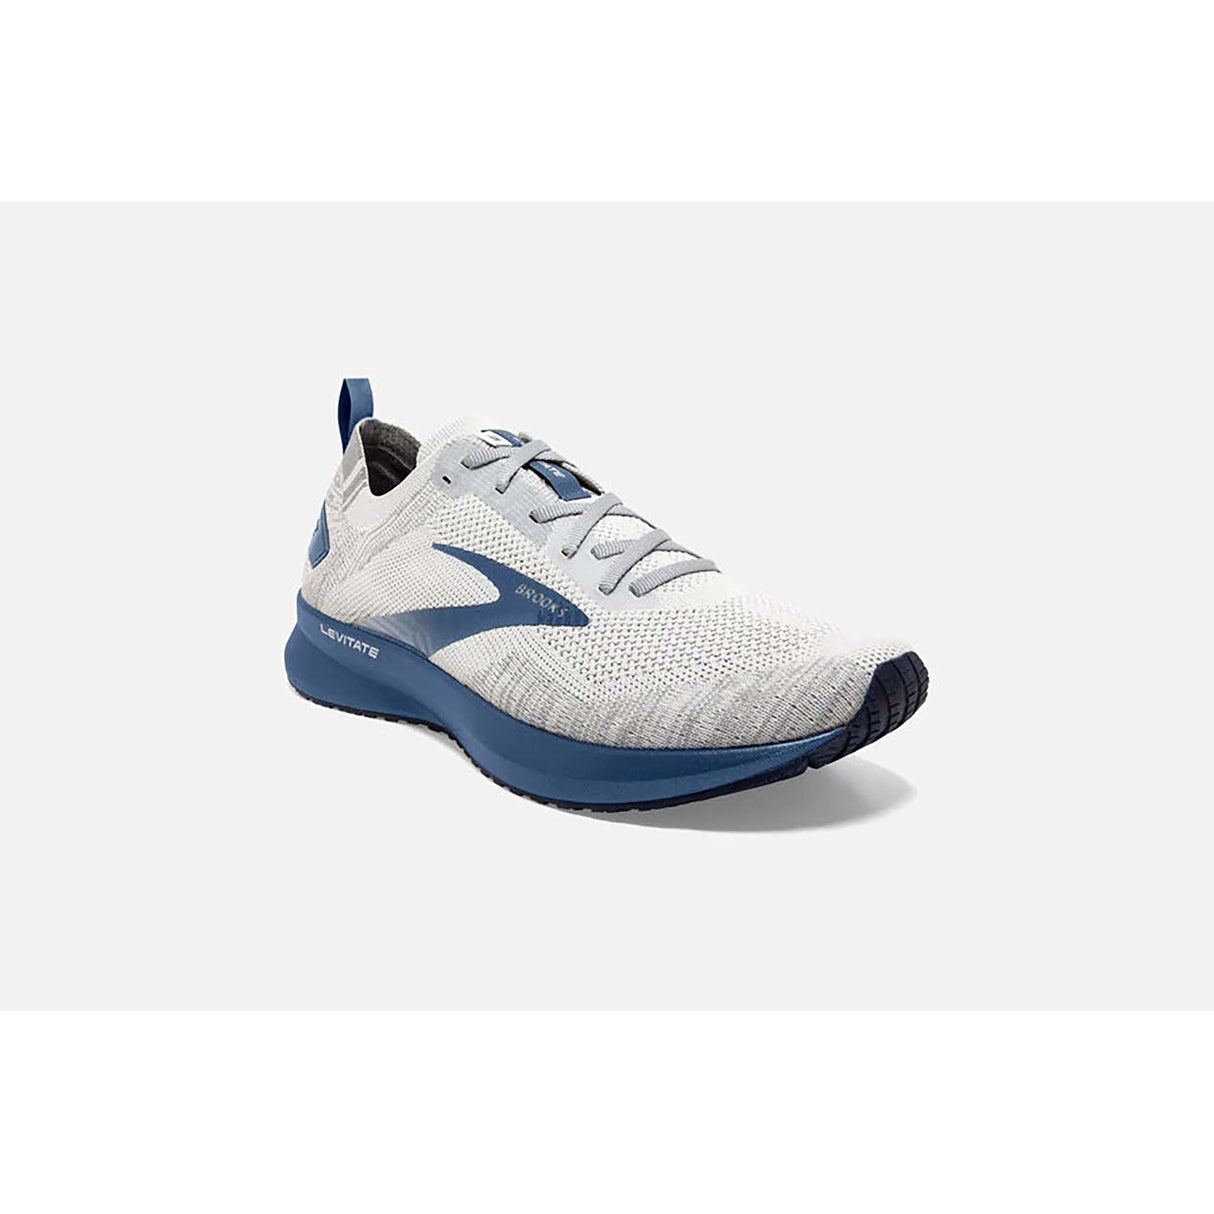 Brooks Levitate 4 chaussures de course a pied pour homme grey oyster blue lateral